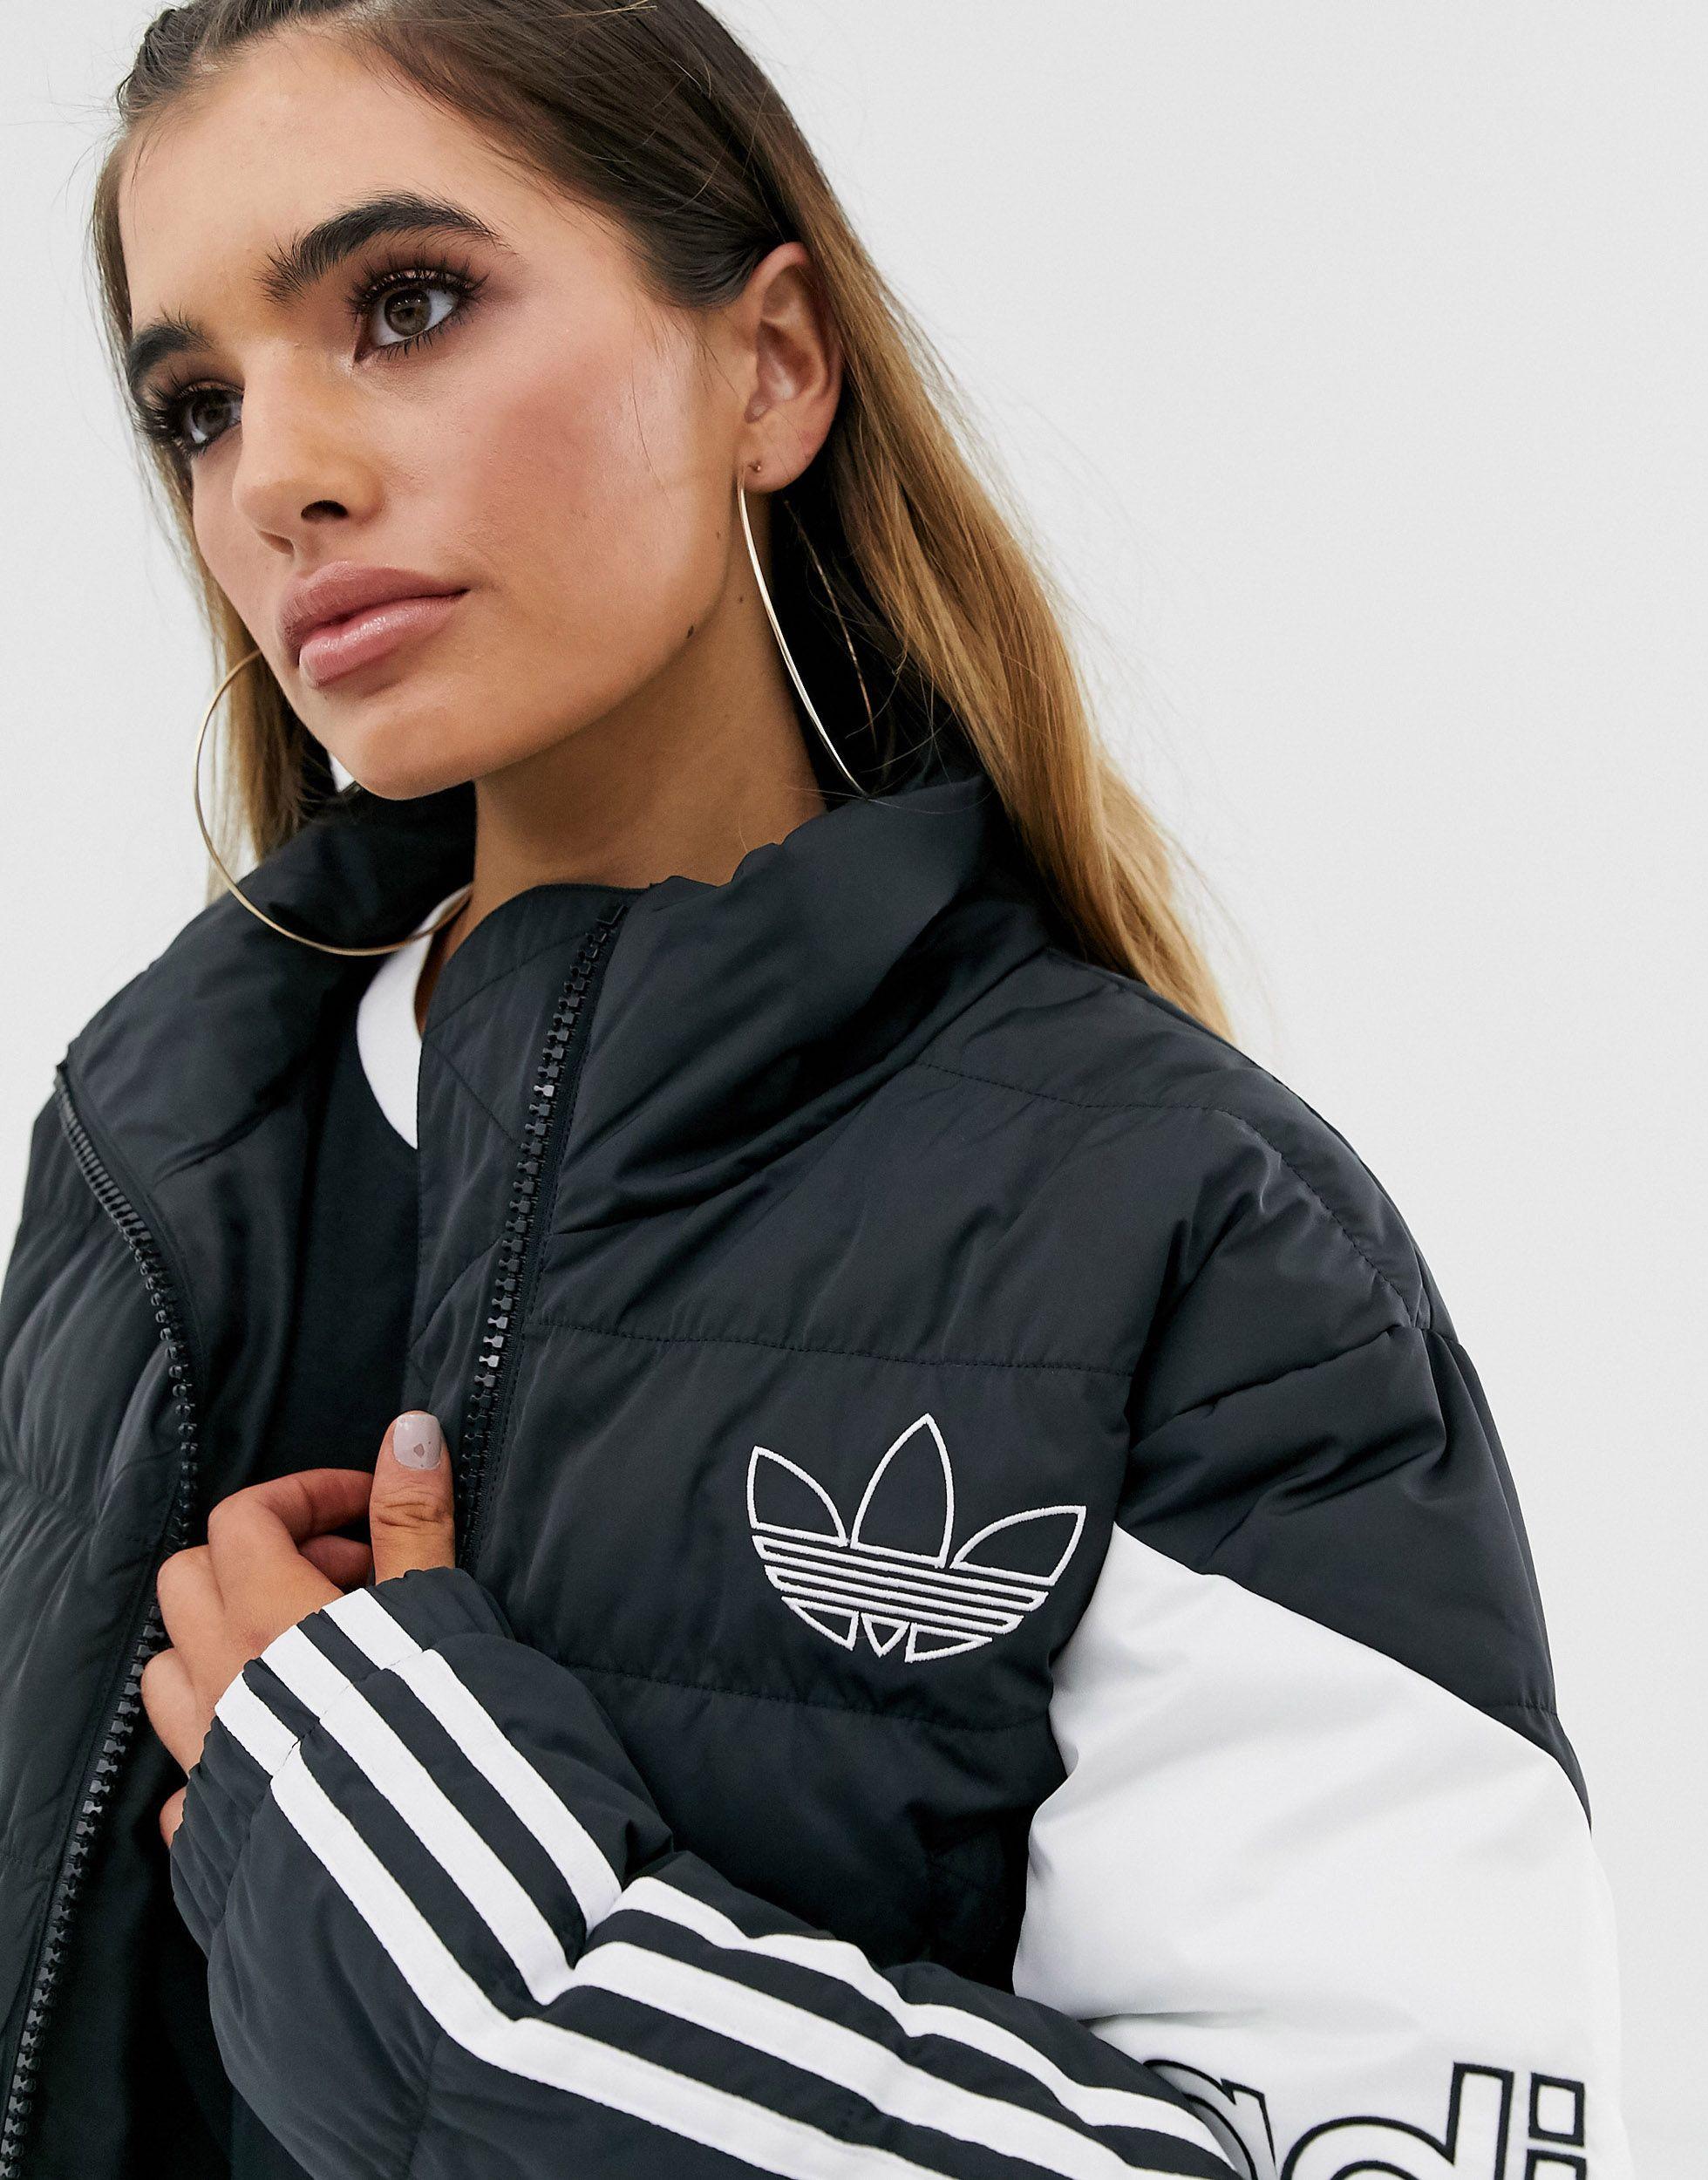 plumiferos mujer adidas, great trade Save 77% available - statehouse.gov.sl